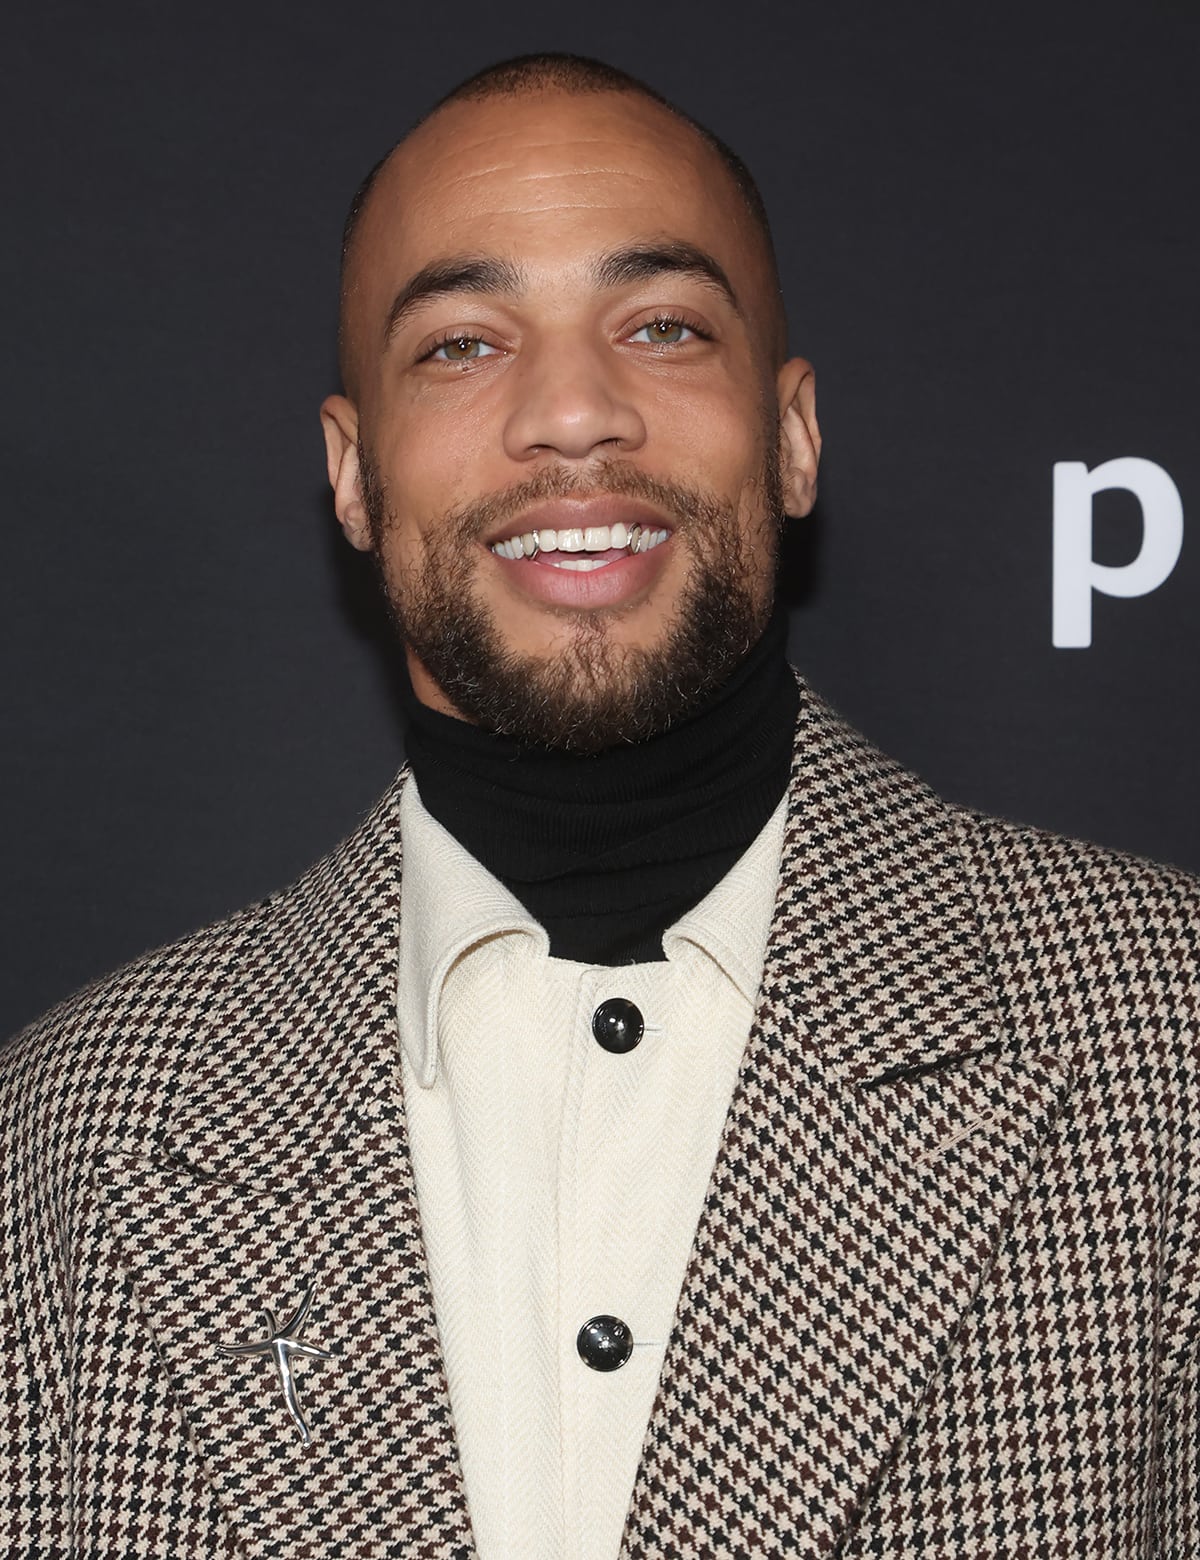 Kendrick Sampson styles his look with an Elsa Peretti Starfish brooch and a couple of Tiffany rings